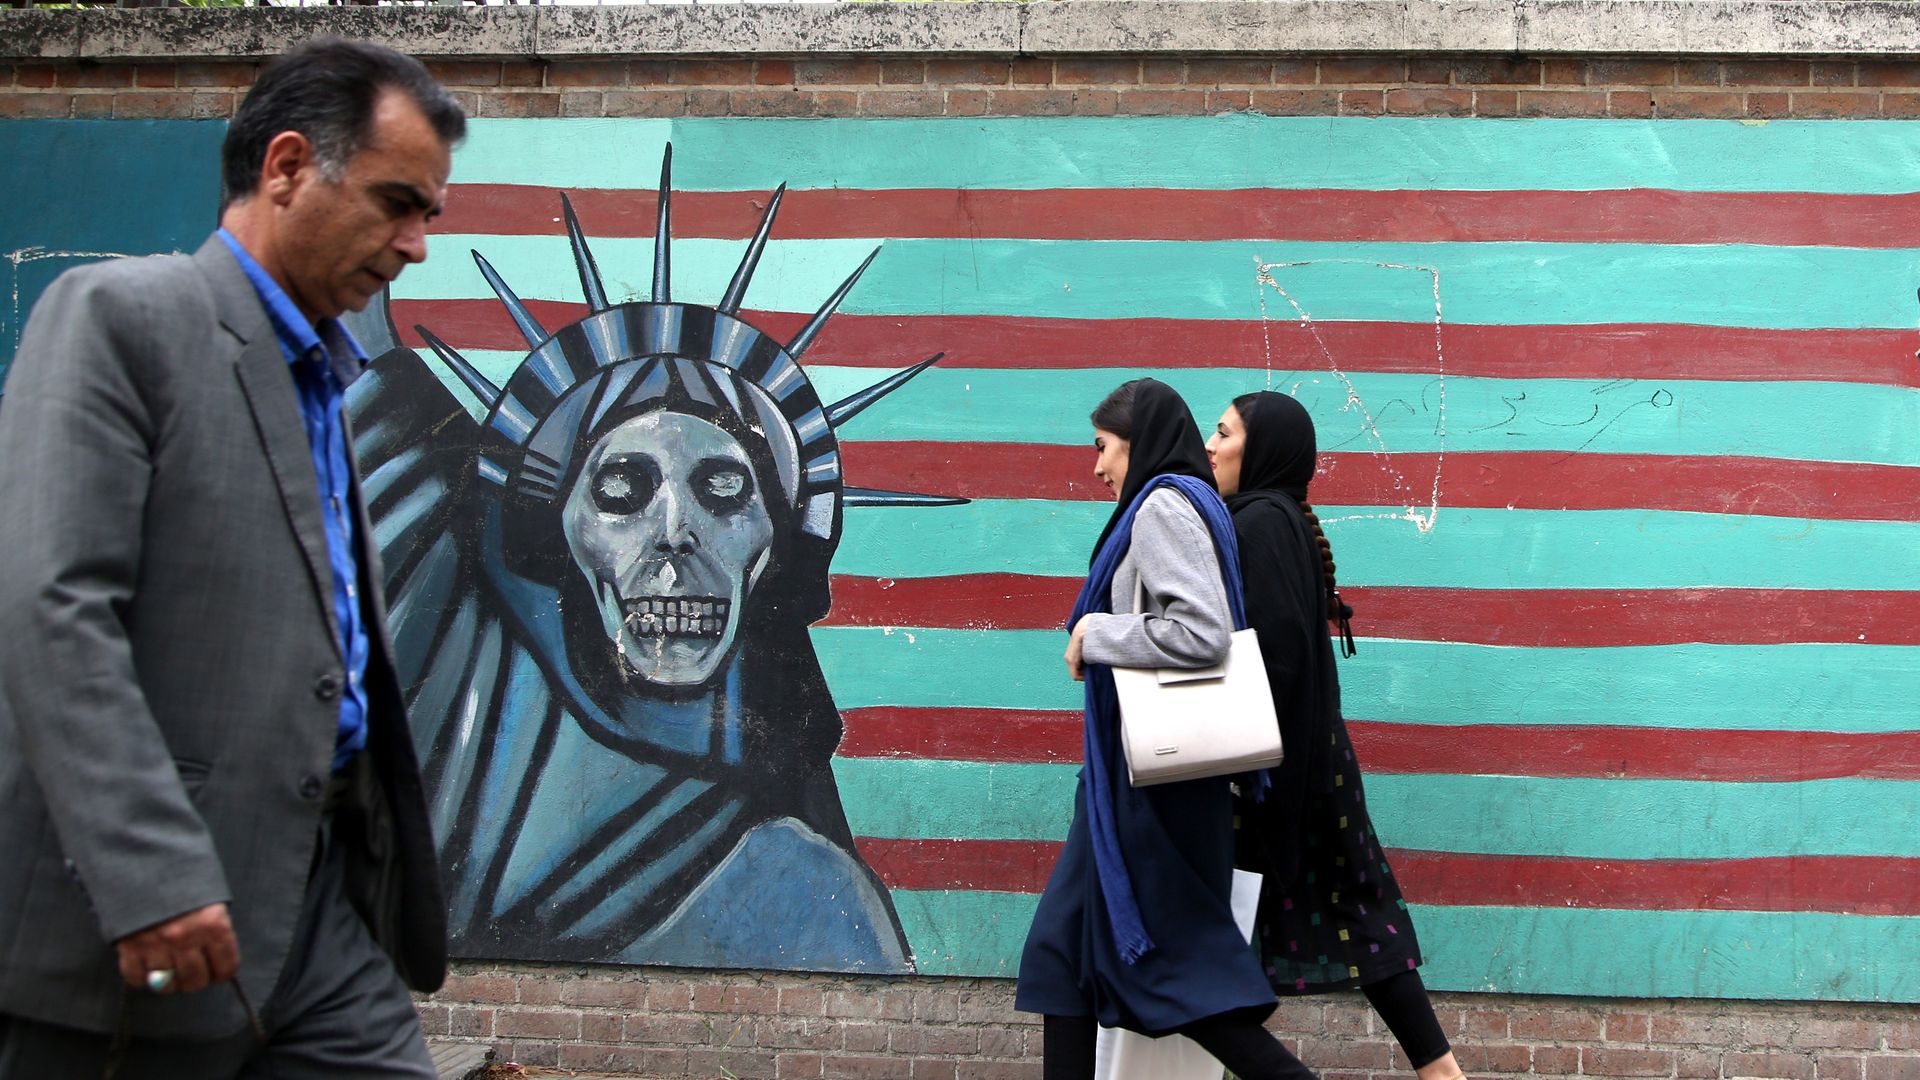  People past a mural painted on the wall of the former U.S. Embassy in Tehran, Iran, on May 9, 2018. US President Donald Trump announced 'withdrawal' from Iran nuclear deal on May 9, 2018. 